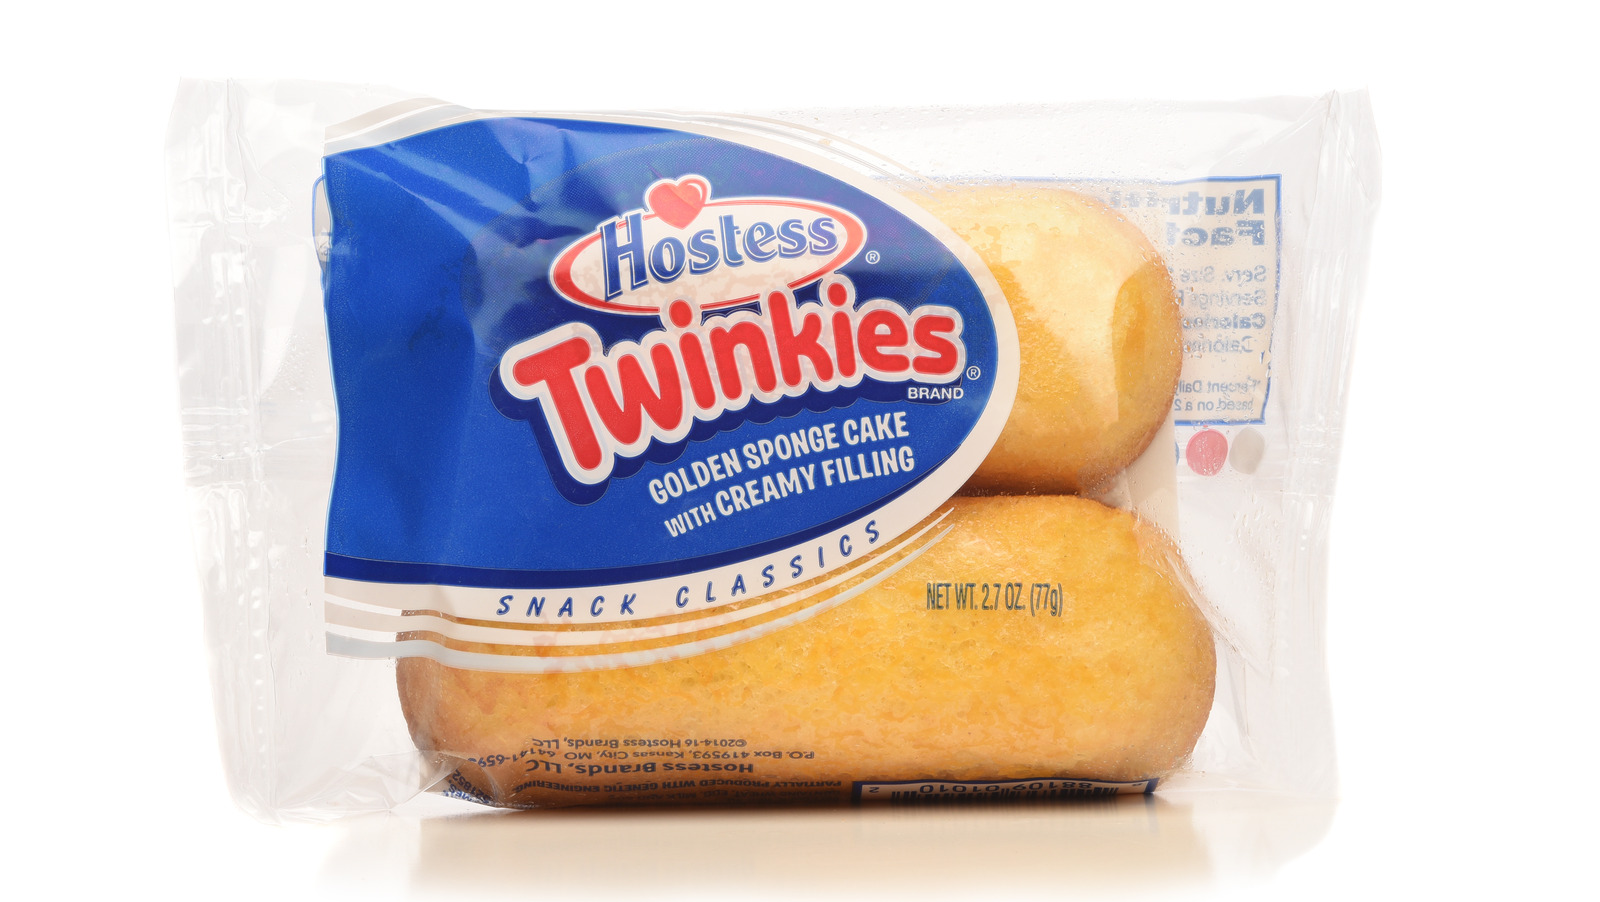 Hostess Twinkies Golden Sponge Snack Cake With Creamy Filling 2 Count -  2.70 Oz